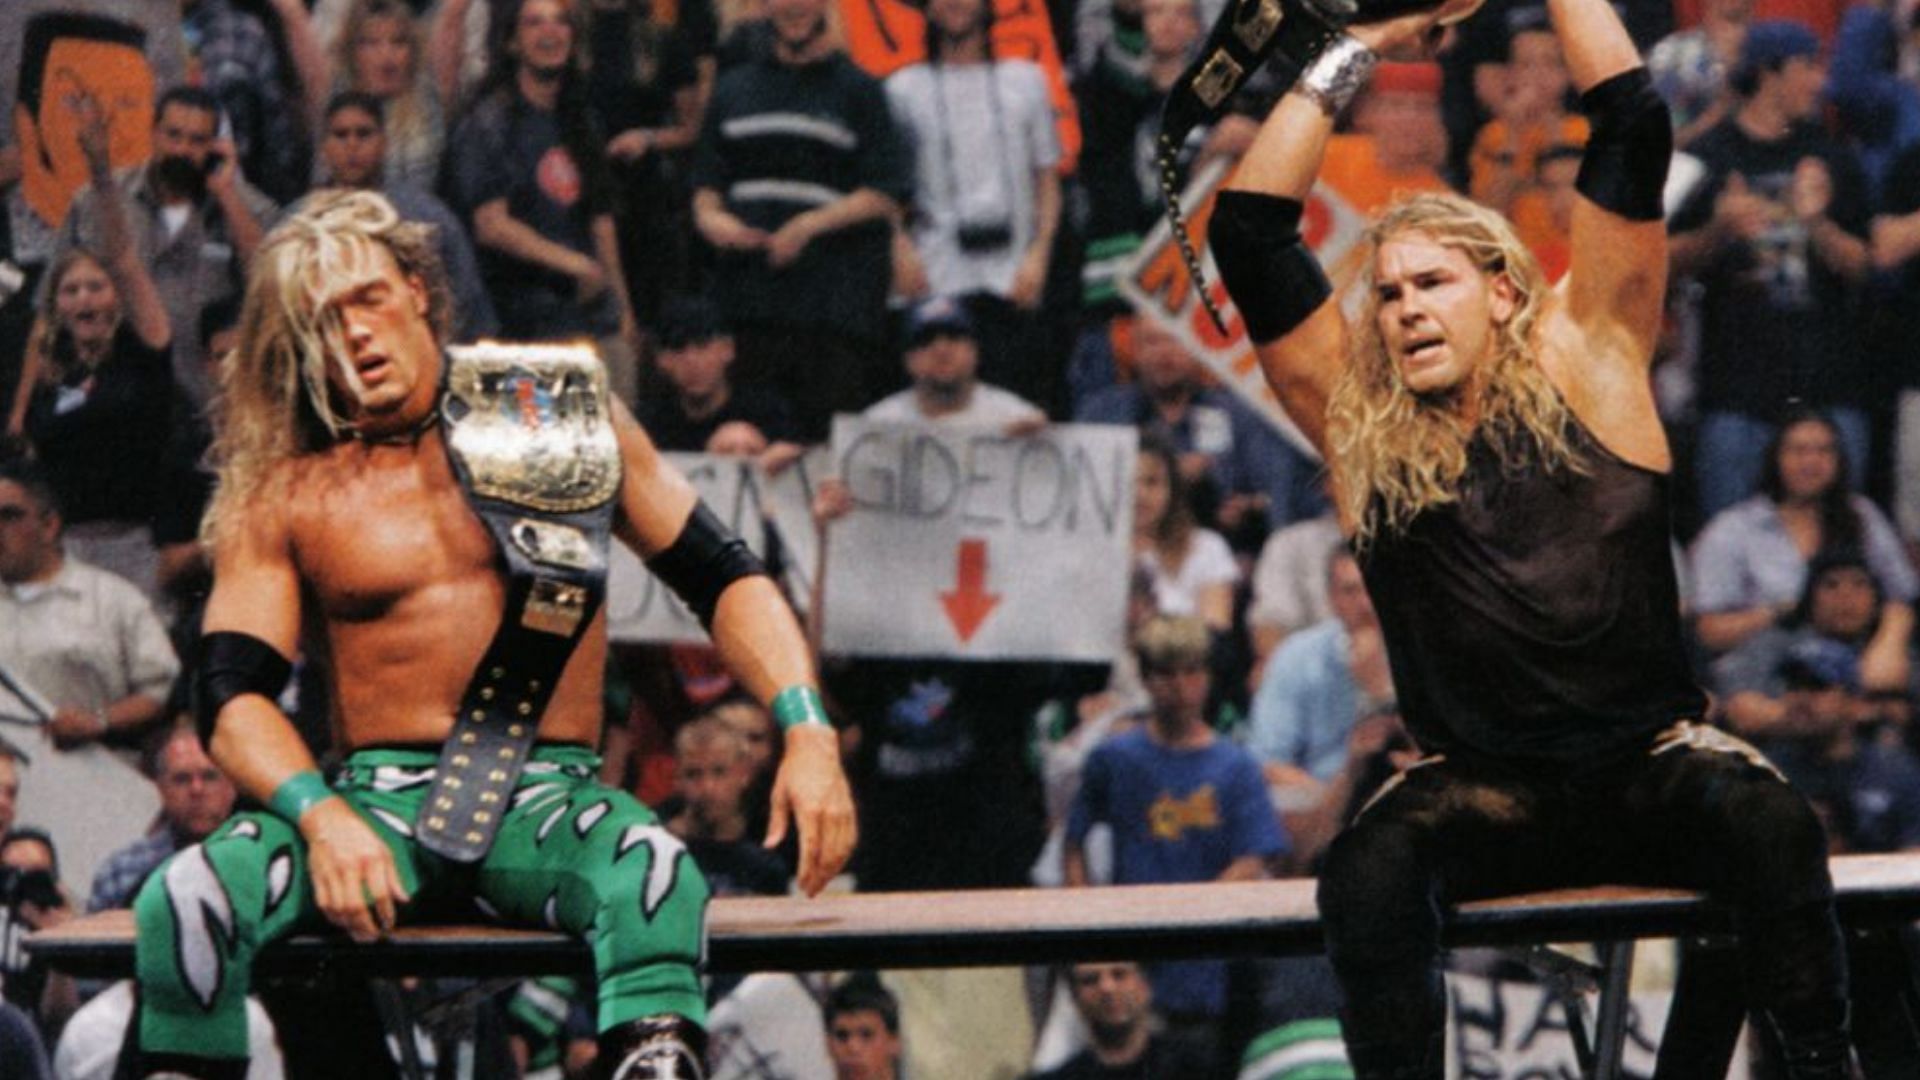 Edge and Christian win the WWF World Tag Team Championship.